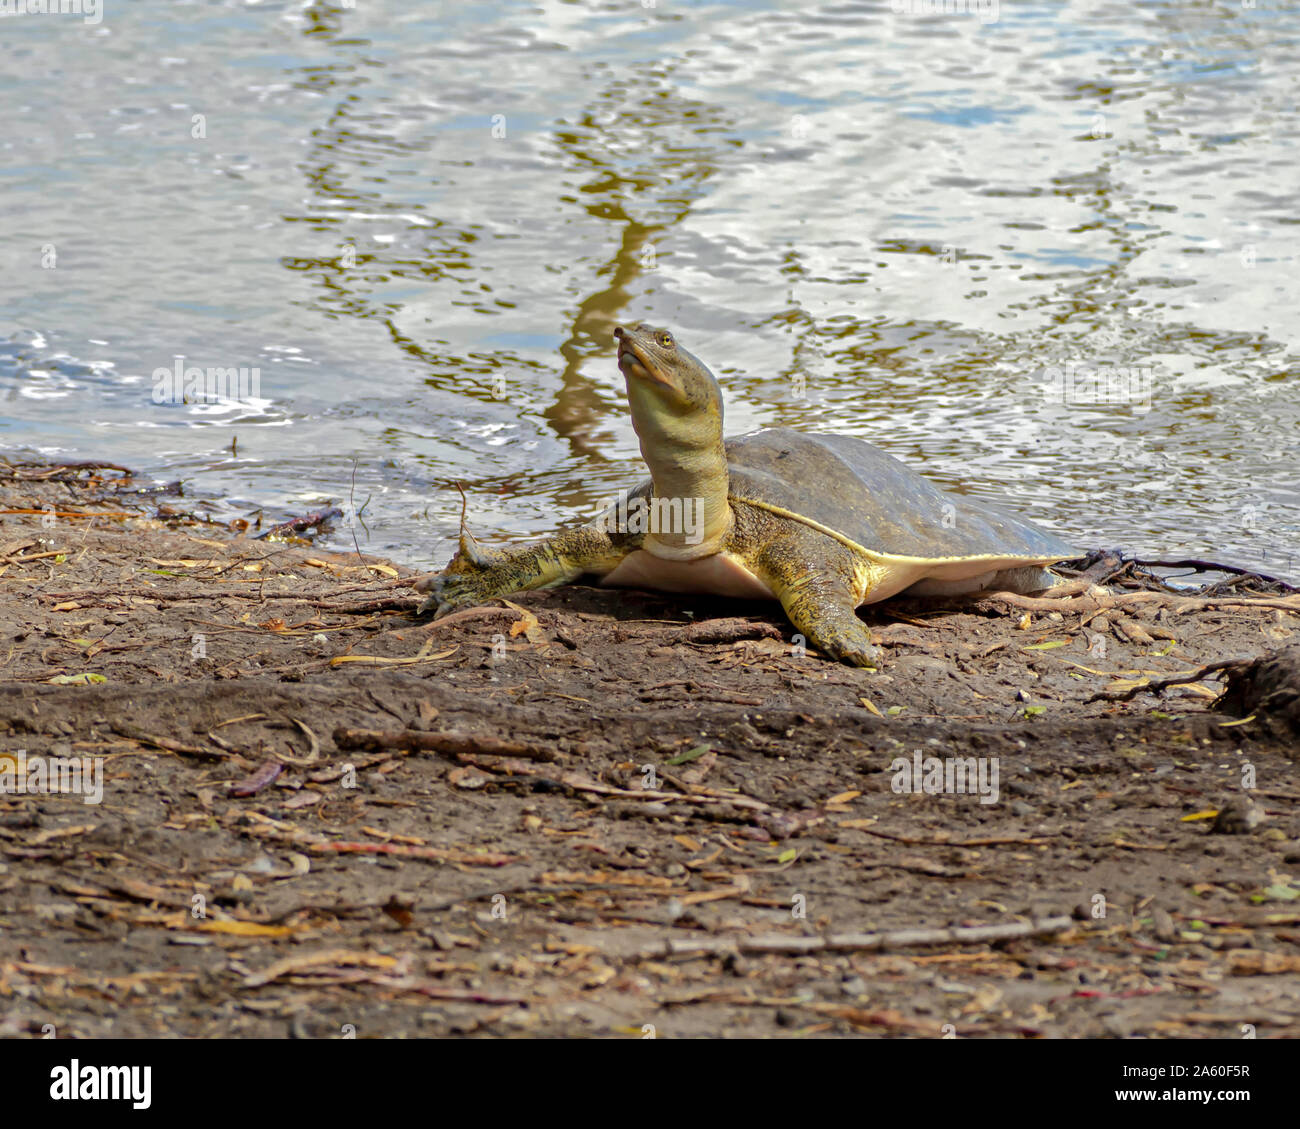 A softshell turtle, Trionychidae, with outstretched neck on land near the edge of a pond. Lakeview park in Corpus Christi, Texas USA. Stock Photo